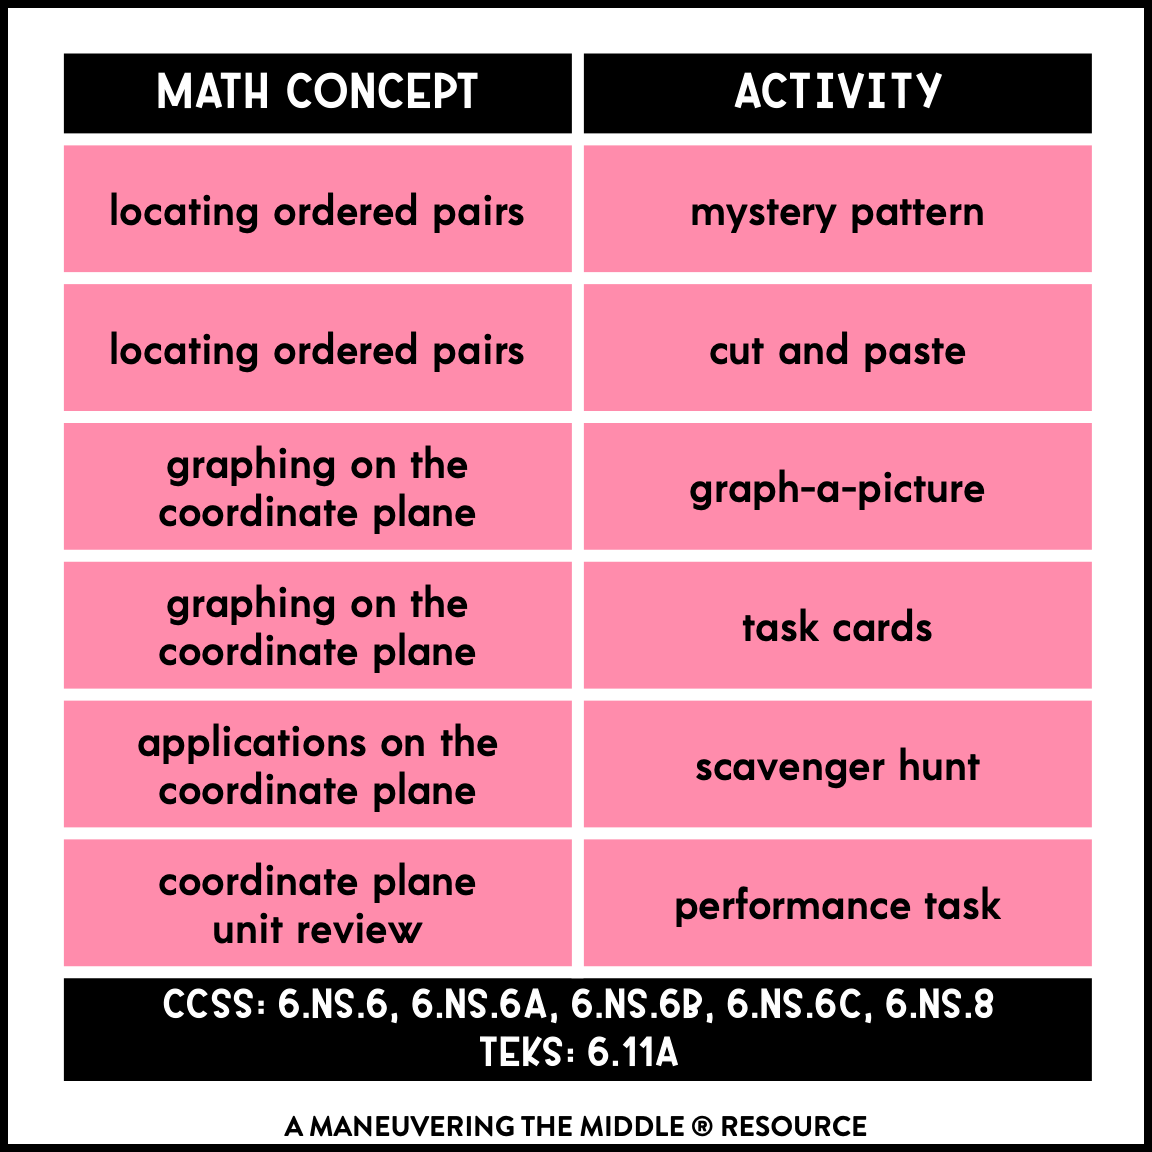 An engaging coordinating plane activity bundle with 6 hands-on and collaborative activities like locating ordered pairs and graphing on the coordinate plane